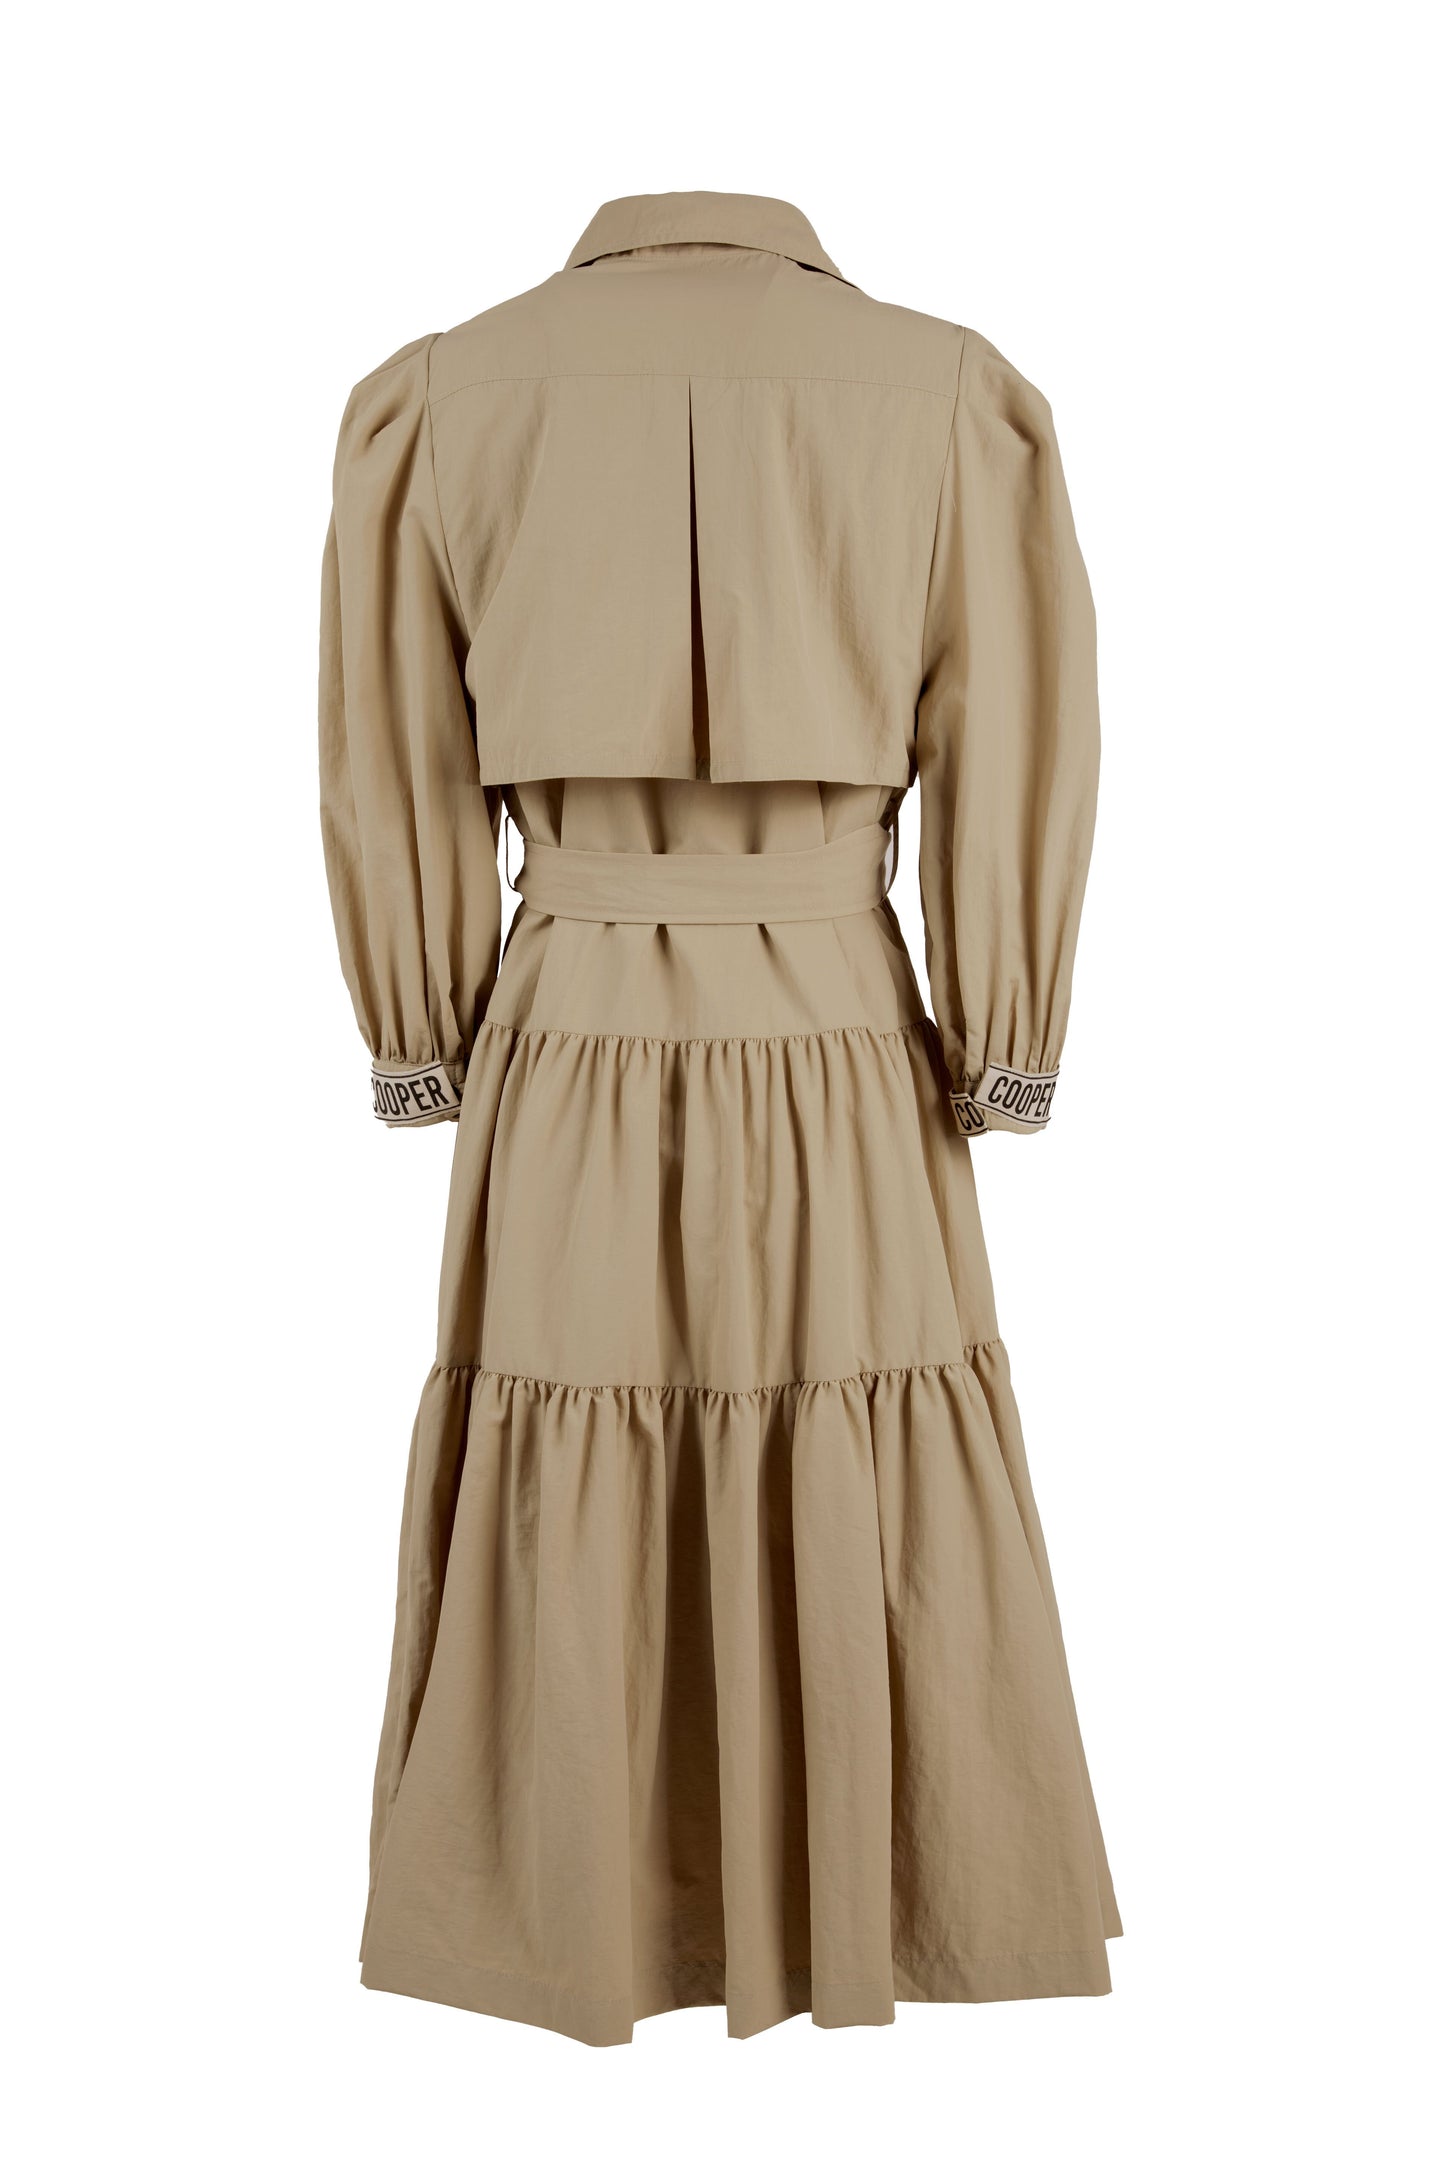 COOPER A NEW BEIGE BRIGADE TRENCH - THE VOGUE STORE